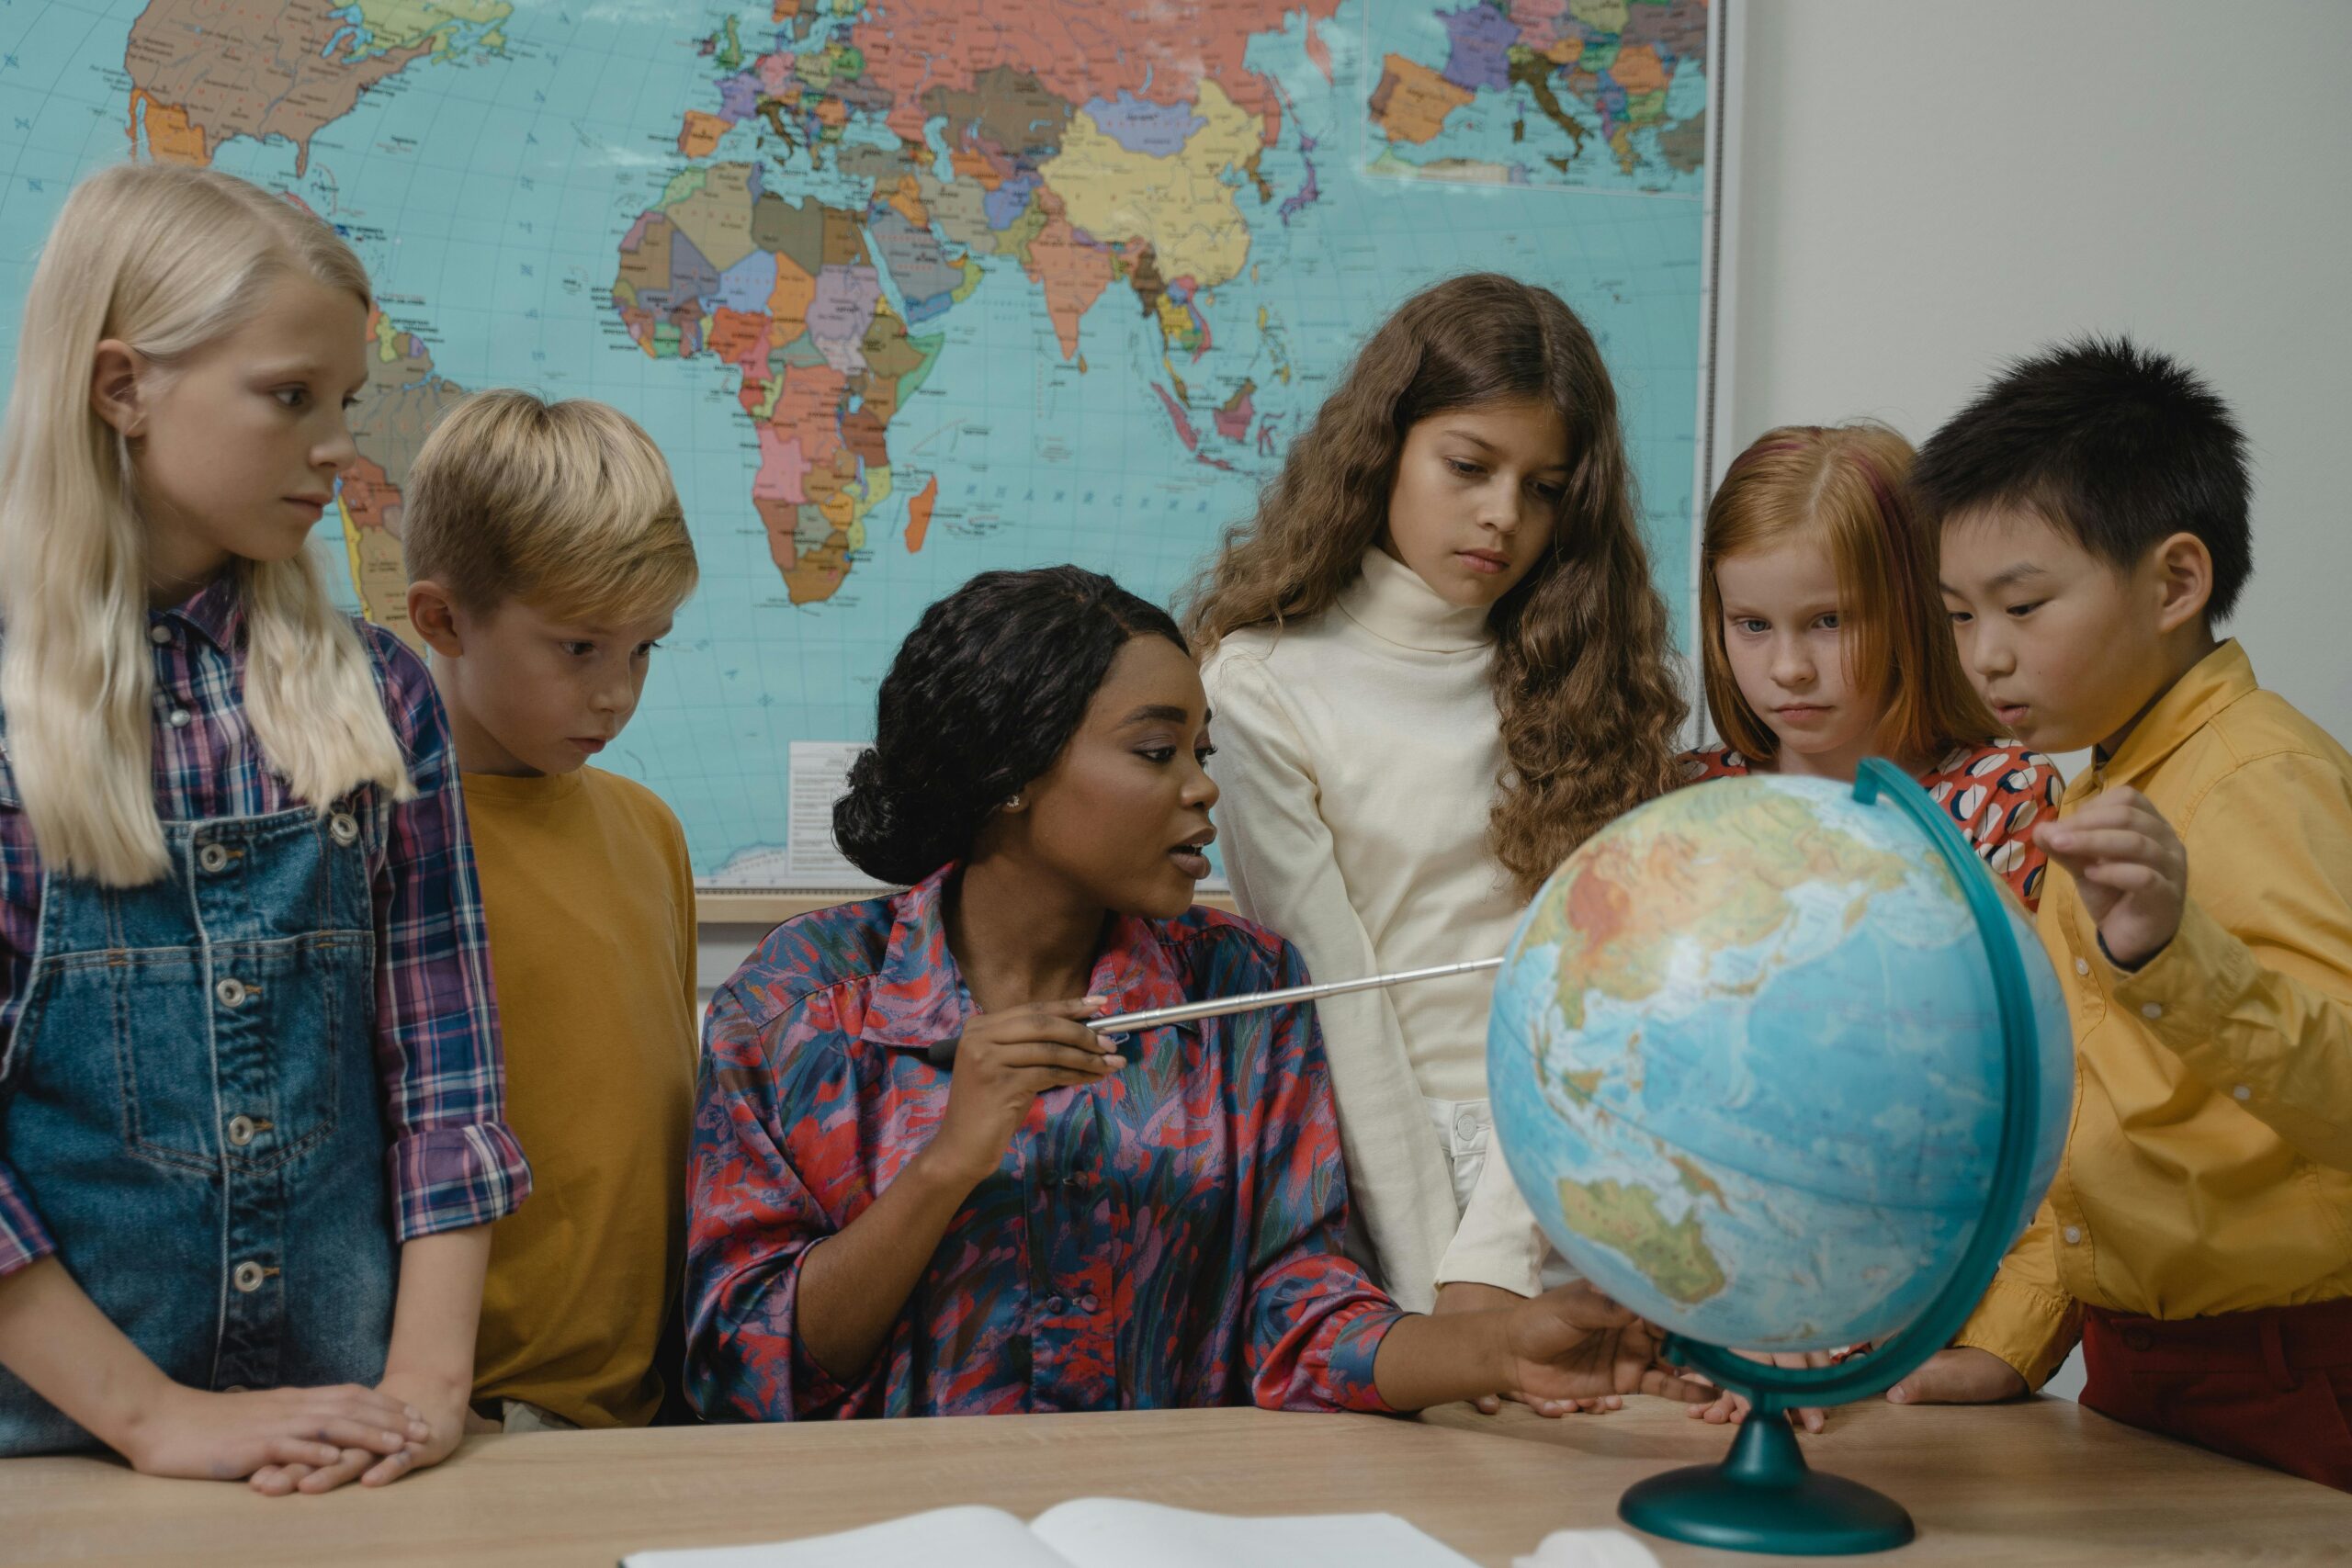 Visual Learning - a teacher points at something on the globe to the students around her